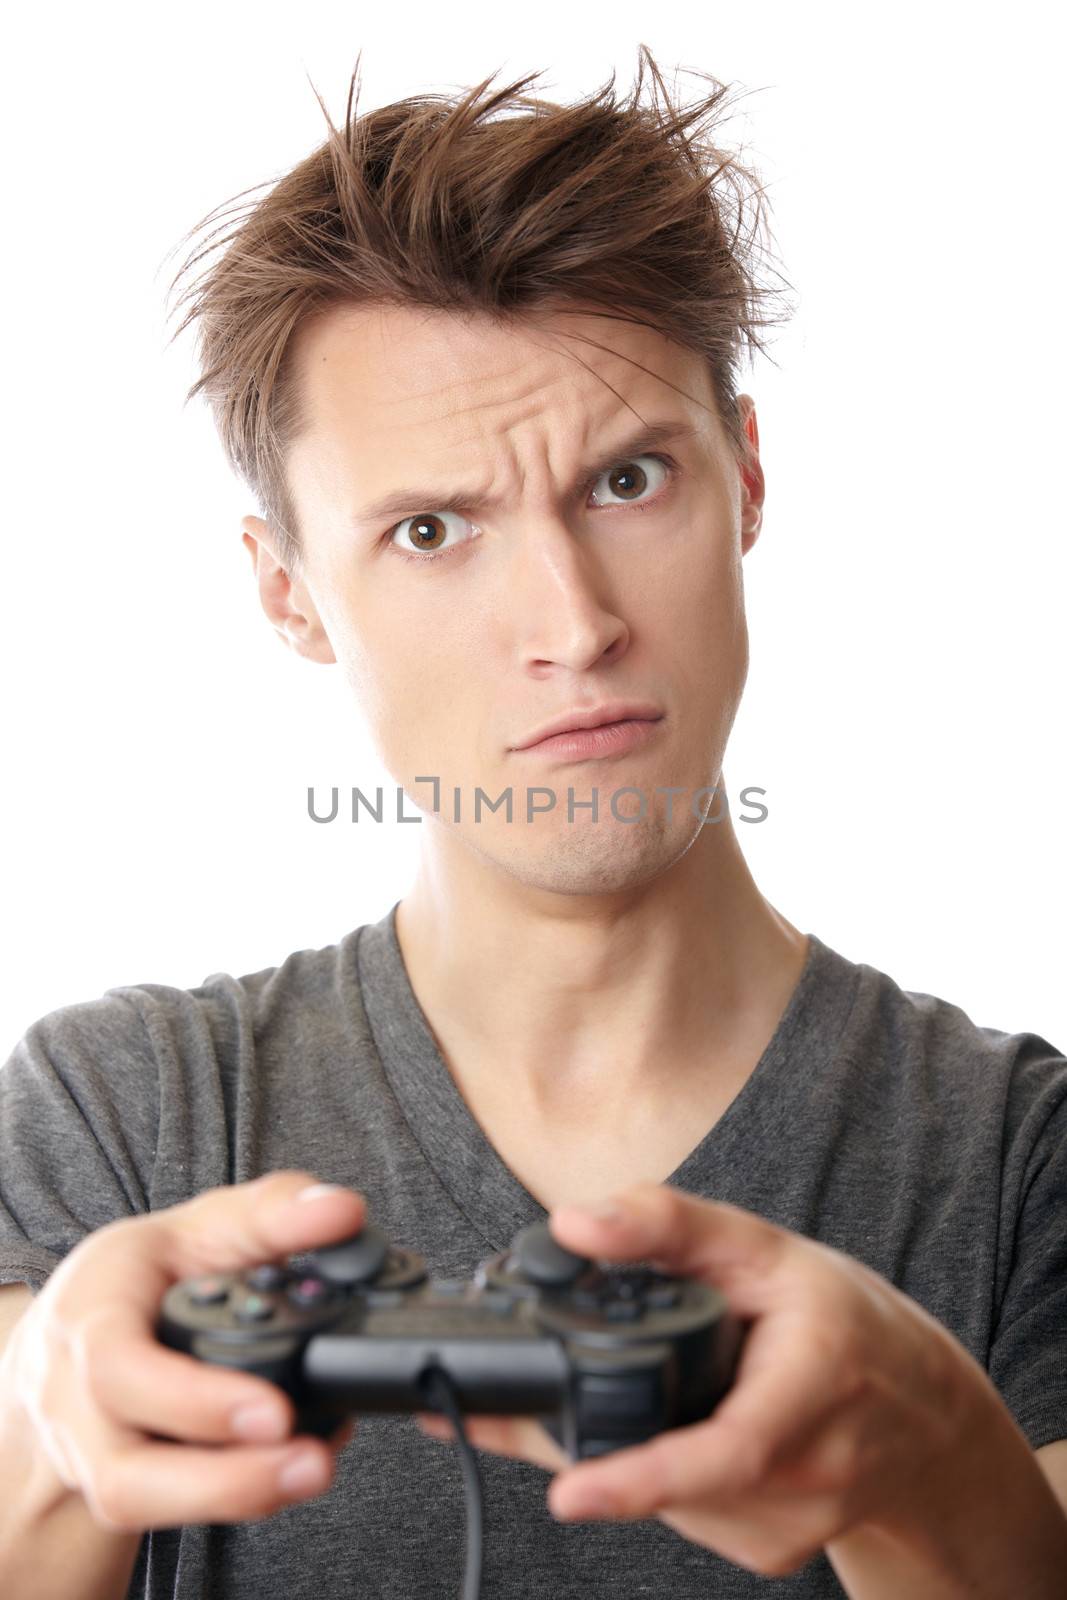 Man playing computer game and using joystick on a white background